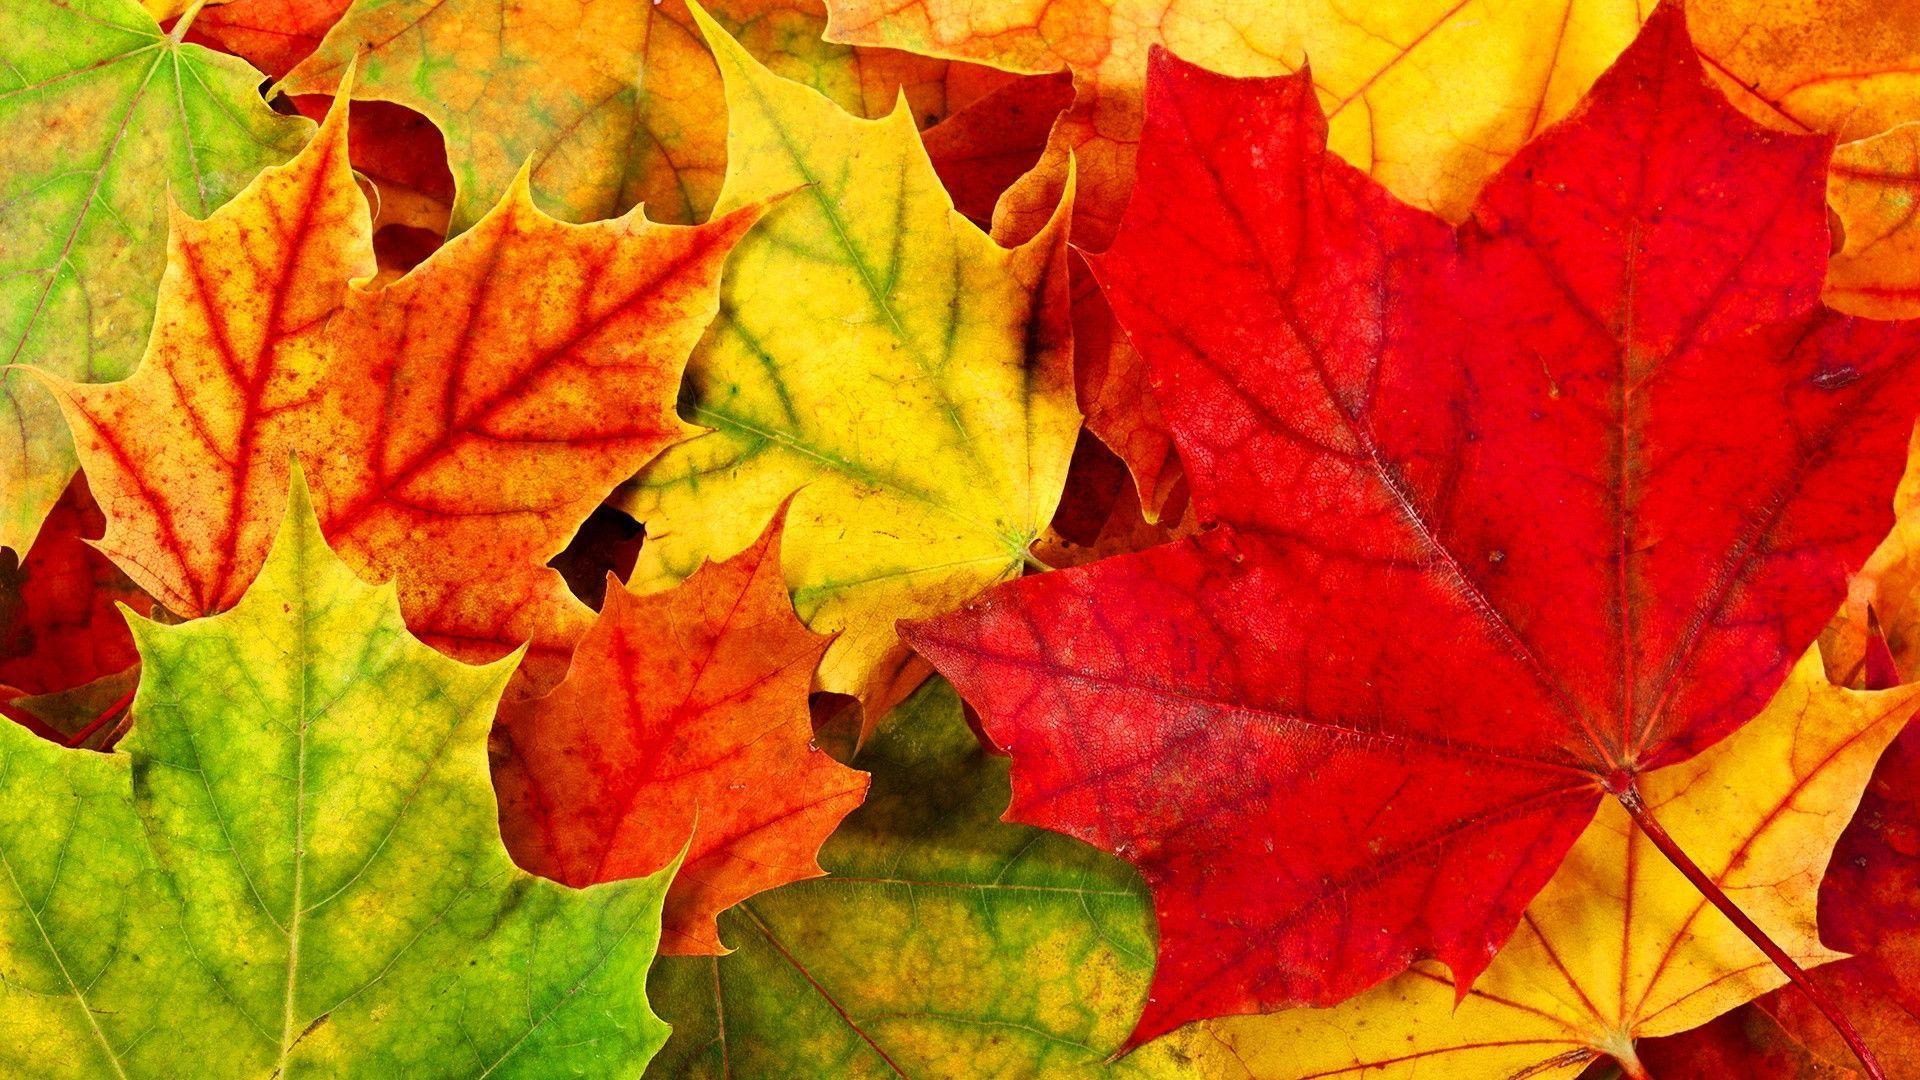 Wallpapers Autumn Leaves - Wallpaper Cave